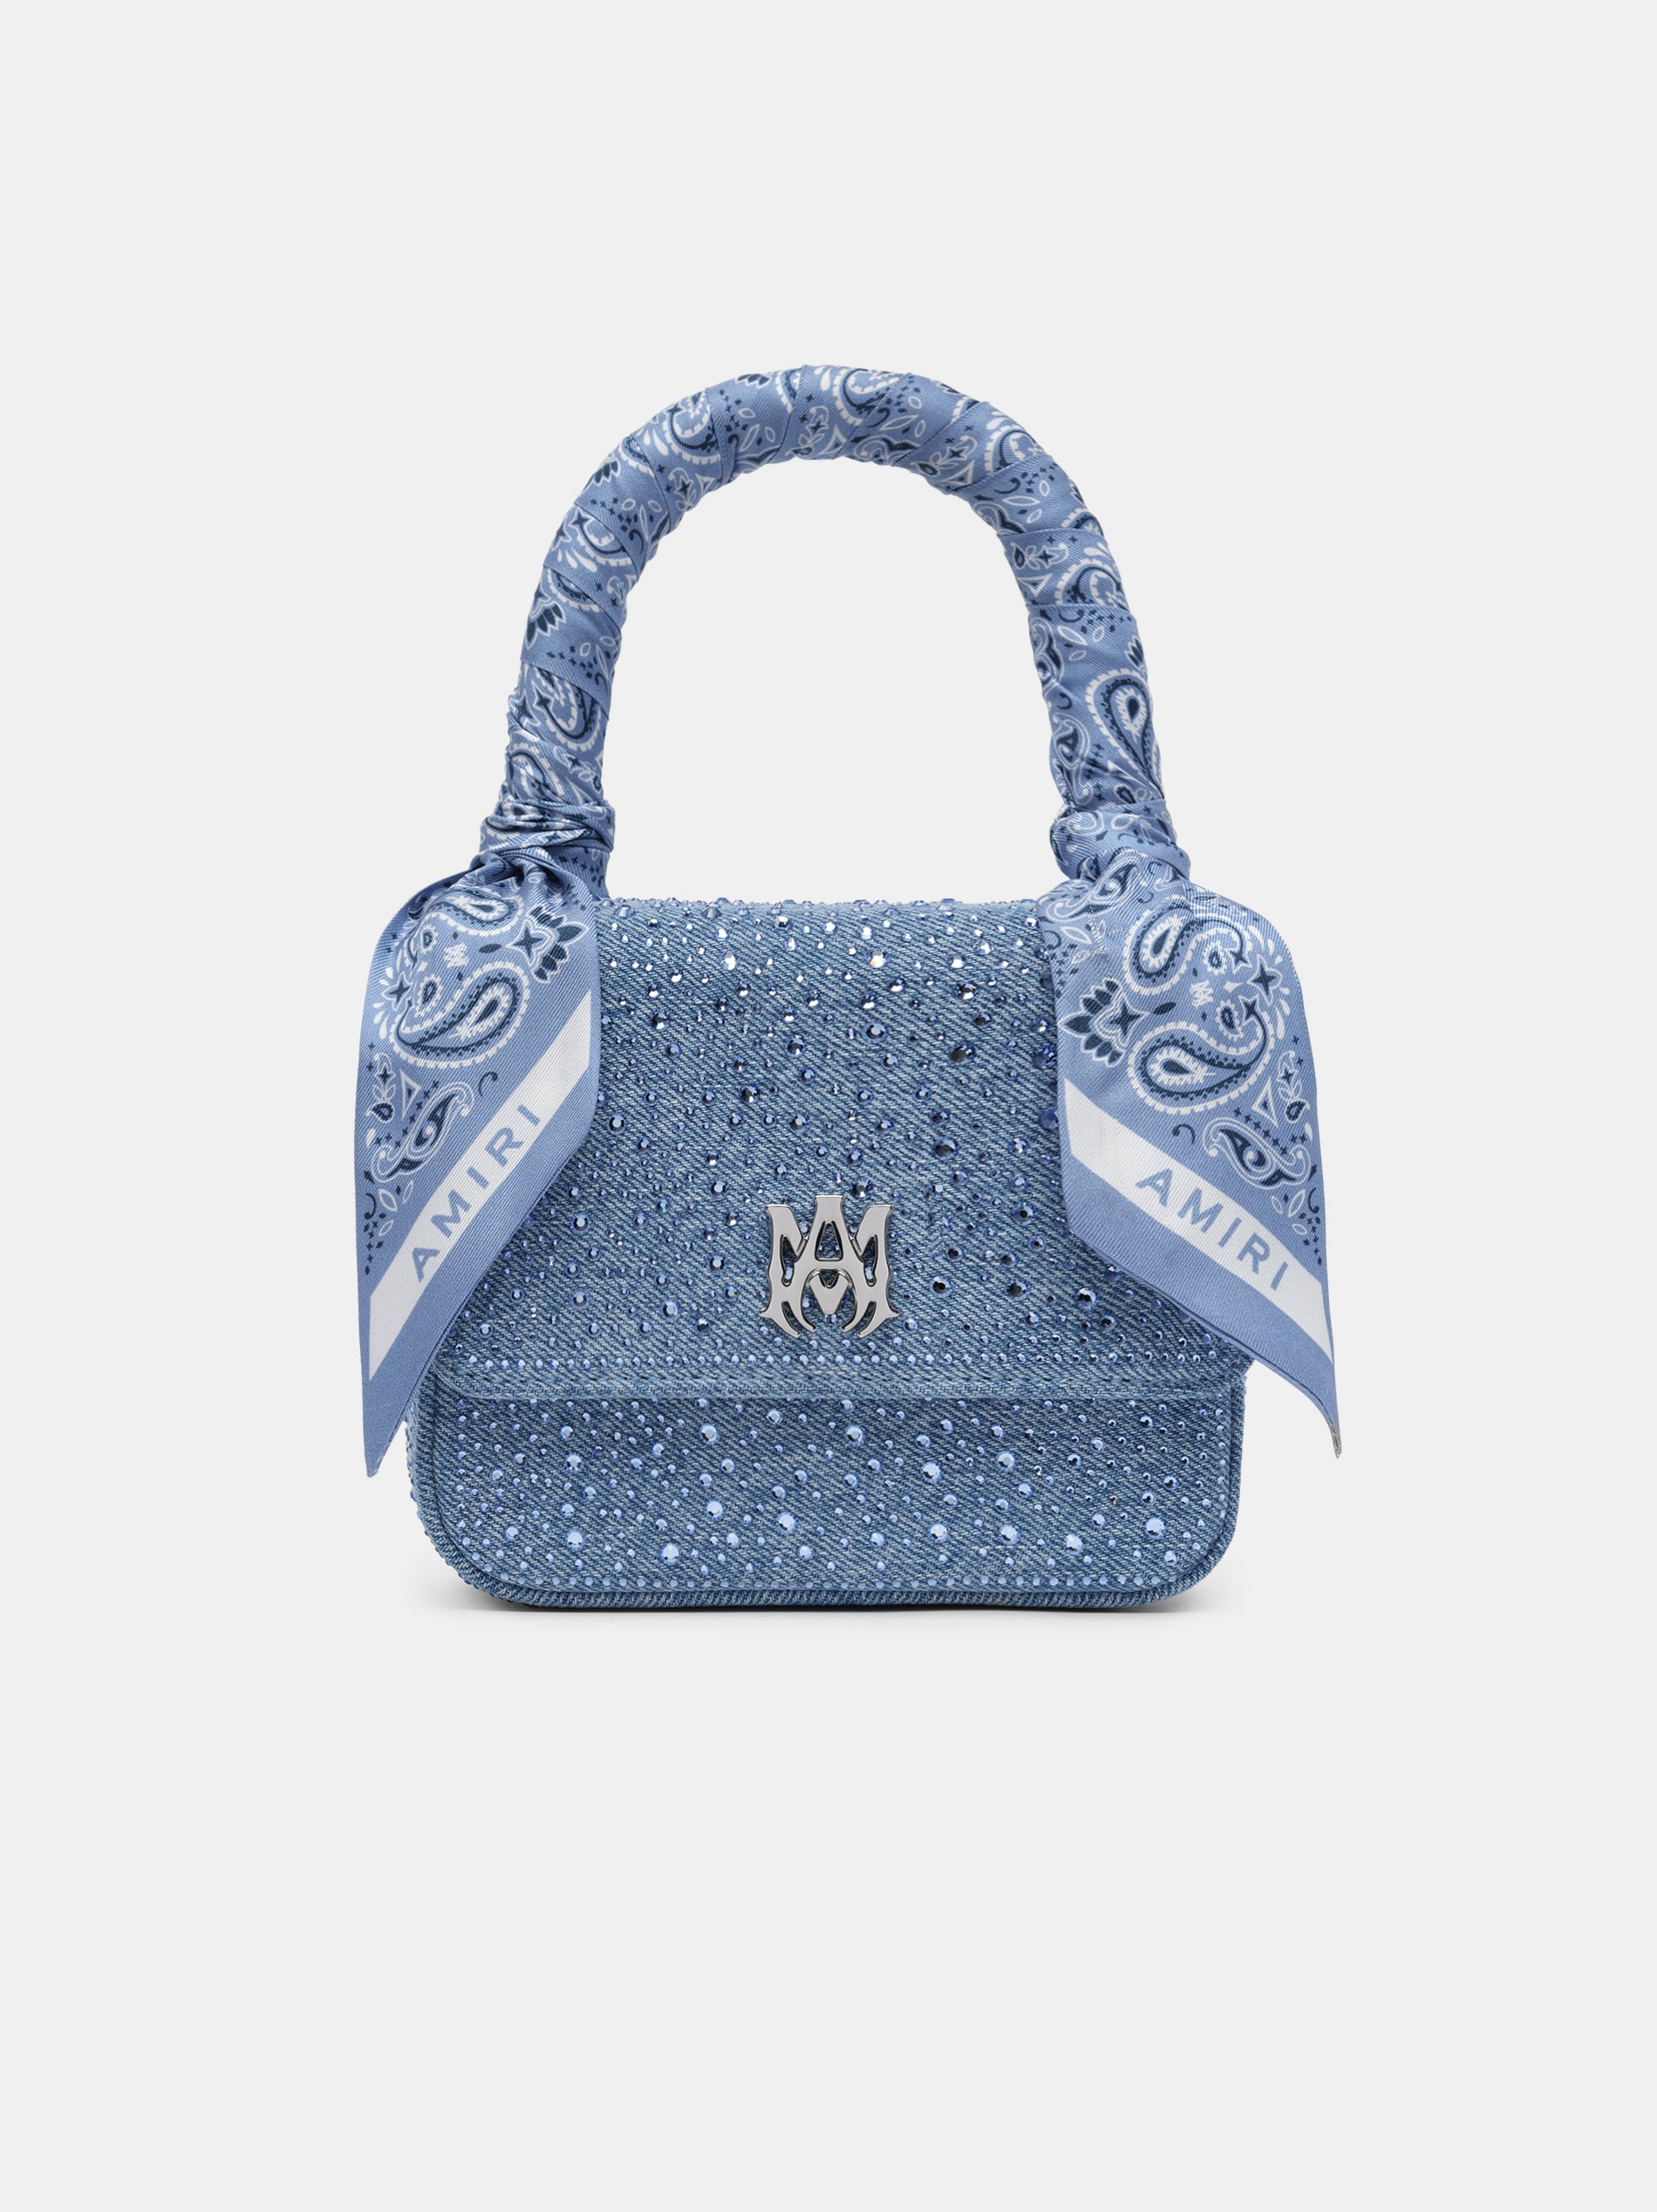 Product WOMEN - CRYSTAL DENIM MICRO MA BAG - True Blue featured image